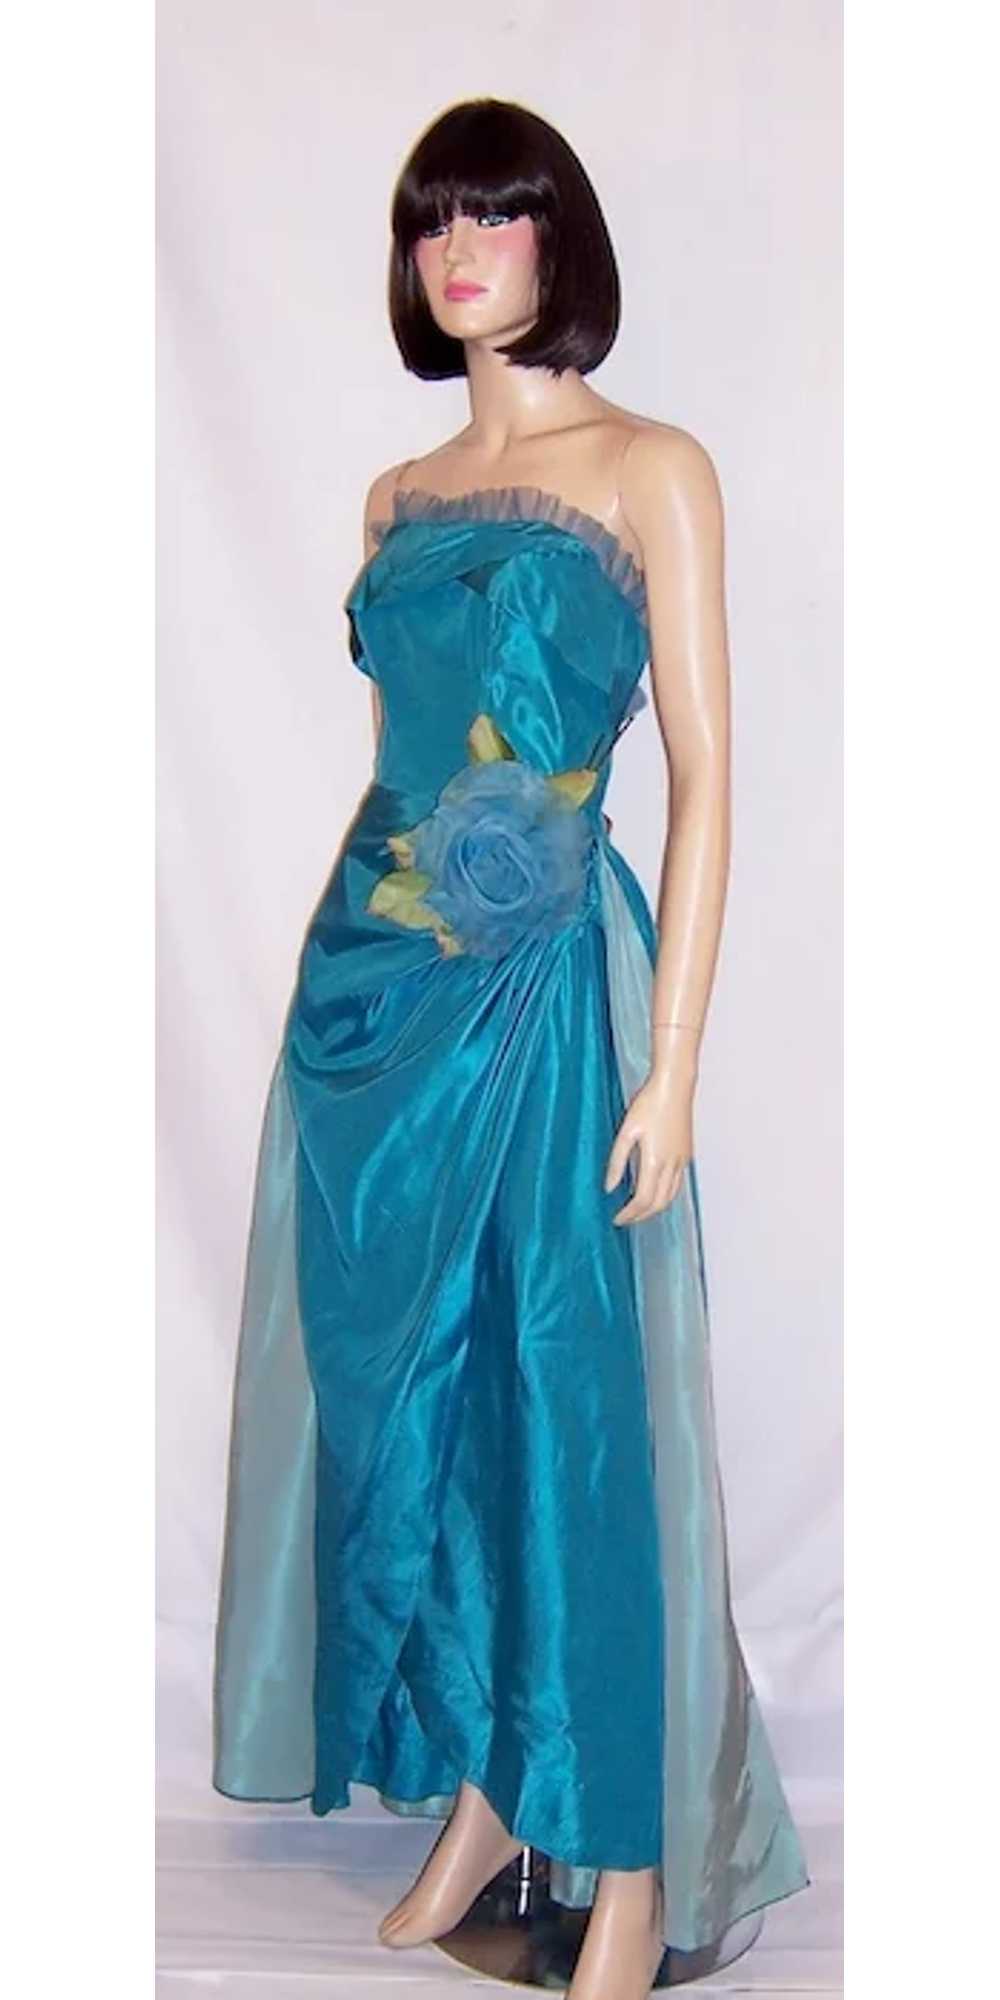 Two-Toned Turquoise Taffeta Strapless Gown - image 2